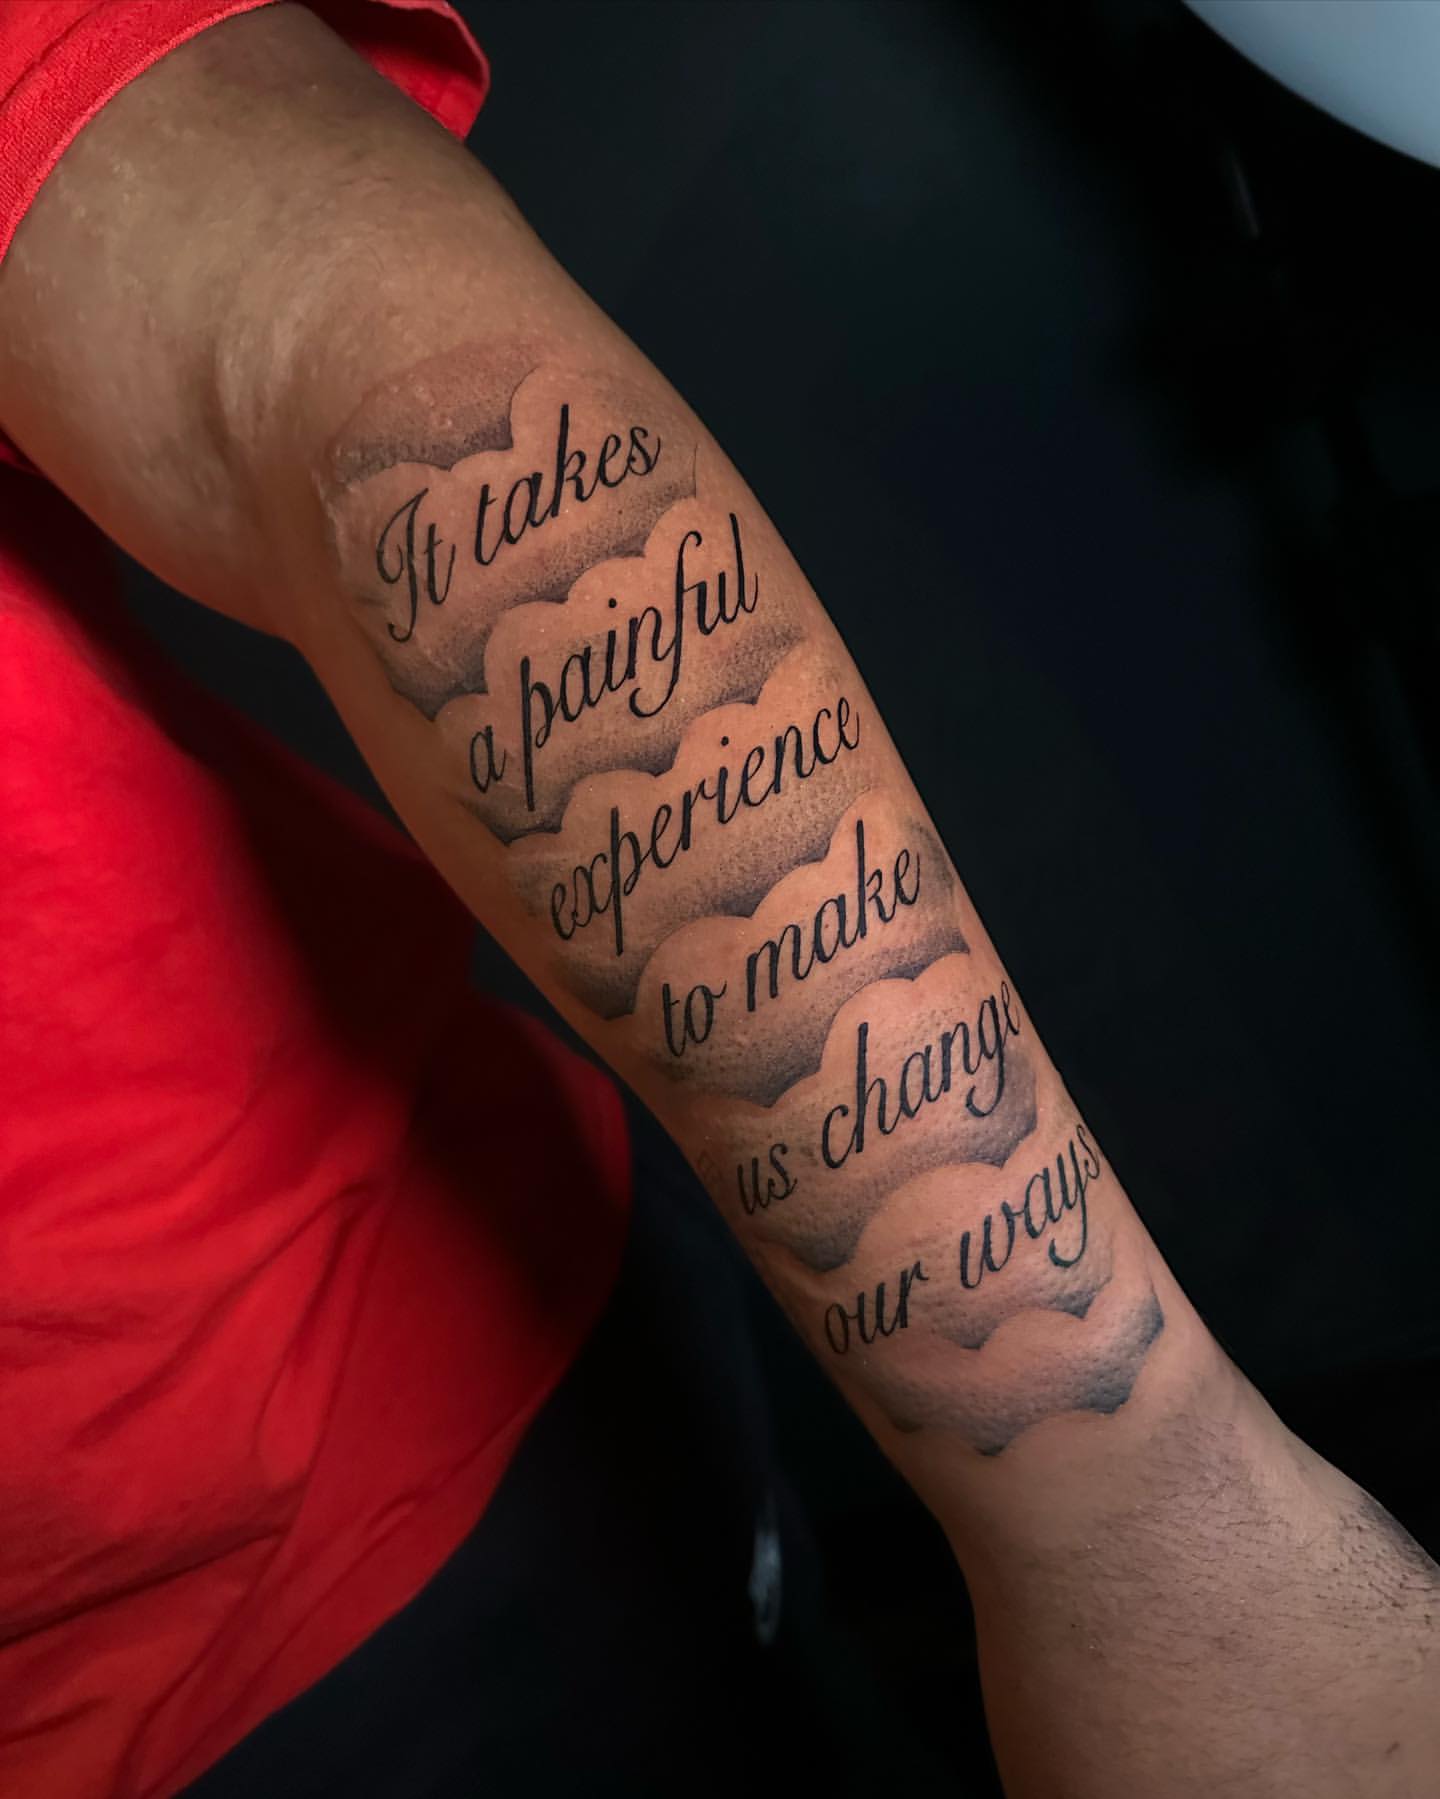 Want A Quote Tattoo? These 26 Life Quotes Are PERFECT | YourTango